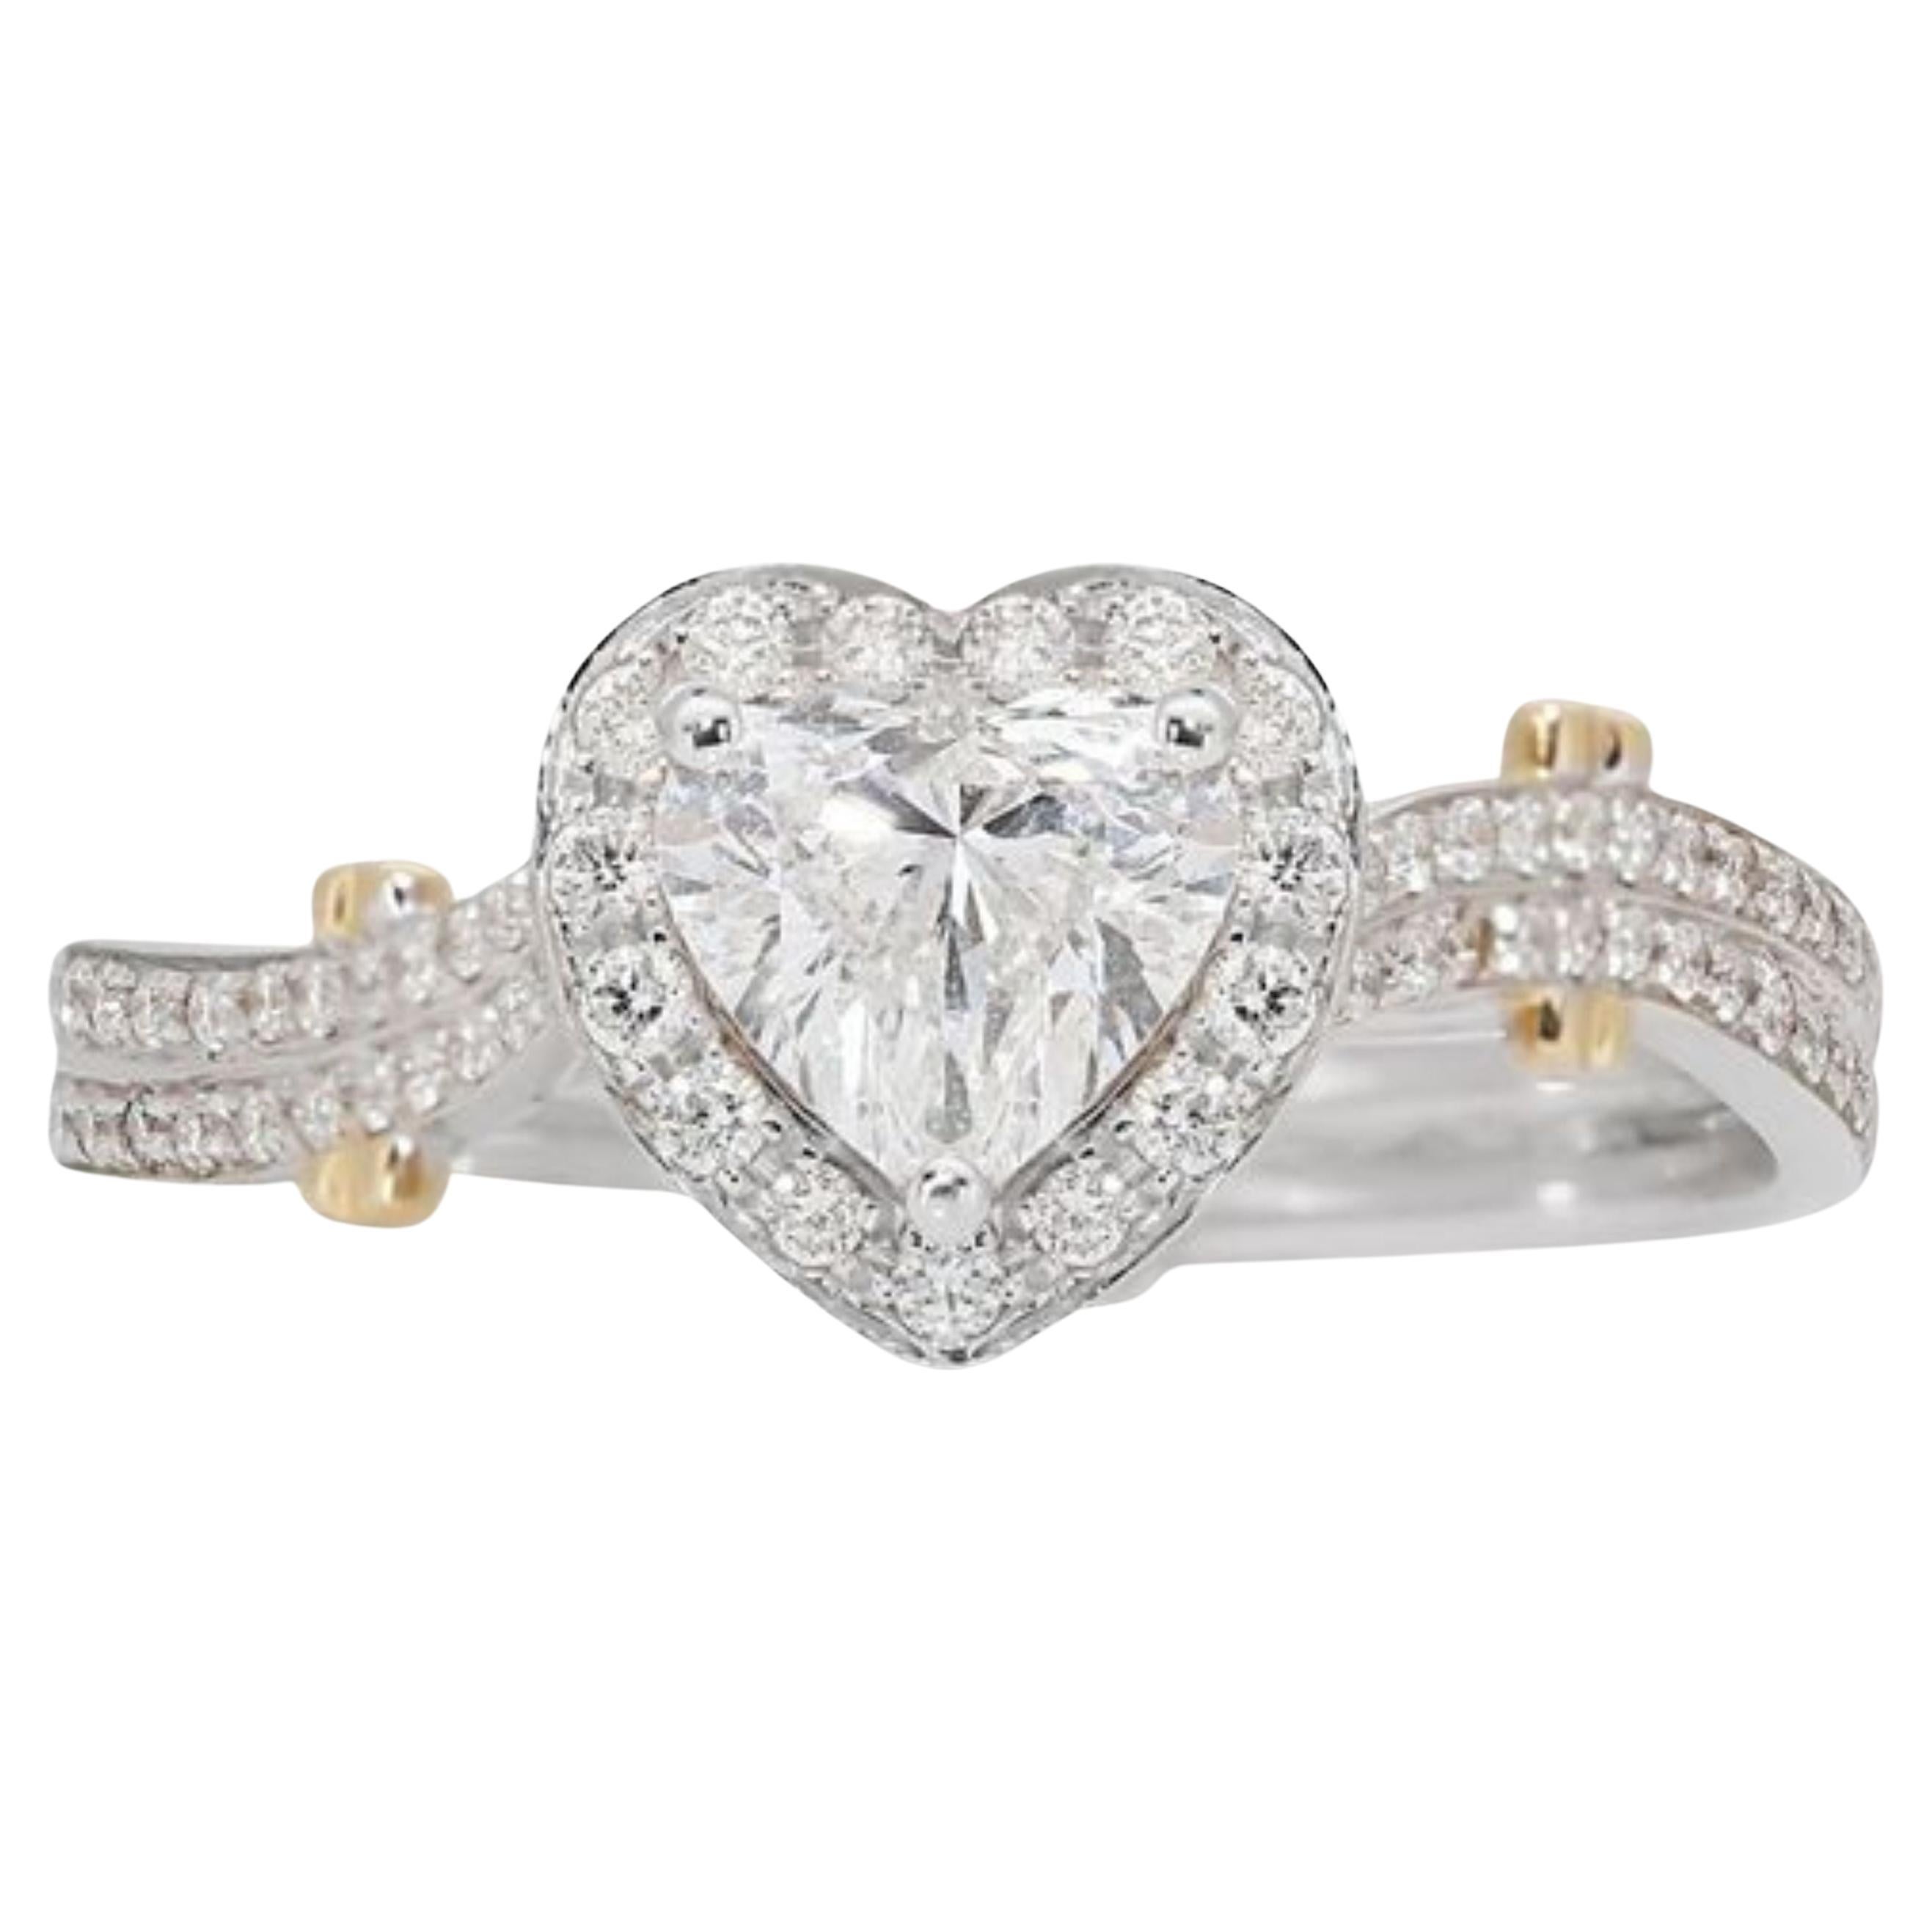 18K White & Yellow Gold Heart Shape Ring with 0.24 Ct Natural Diamonds, GIA Cert For Sale